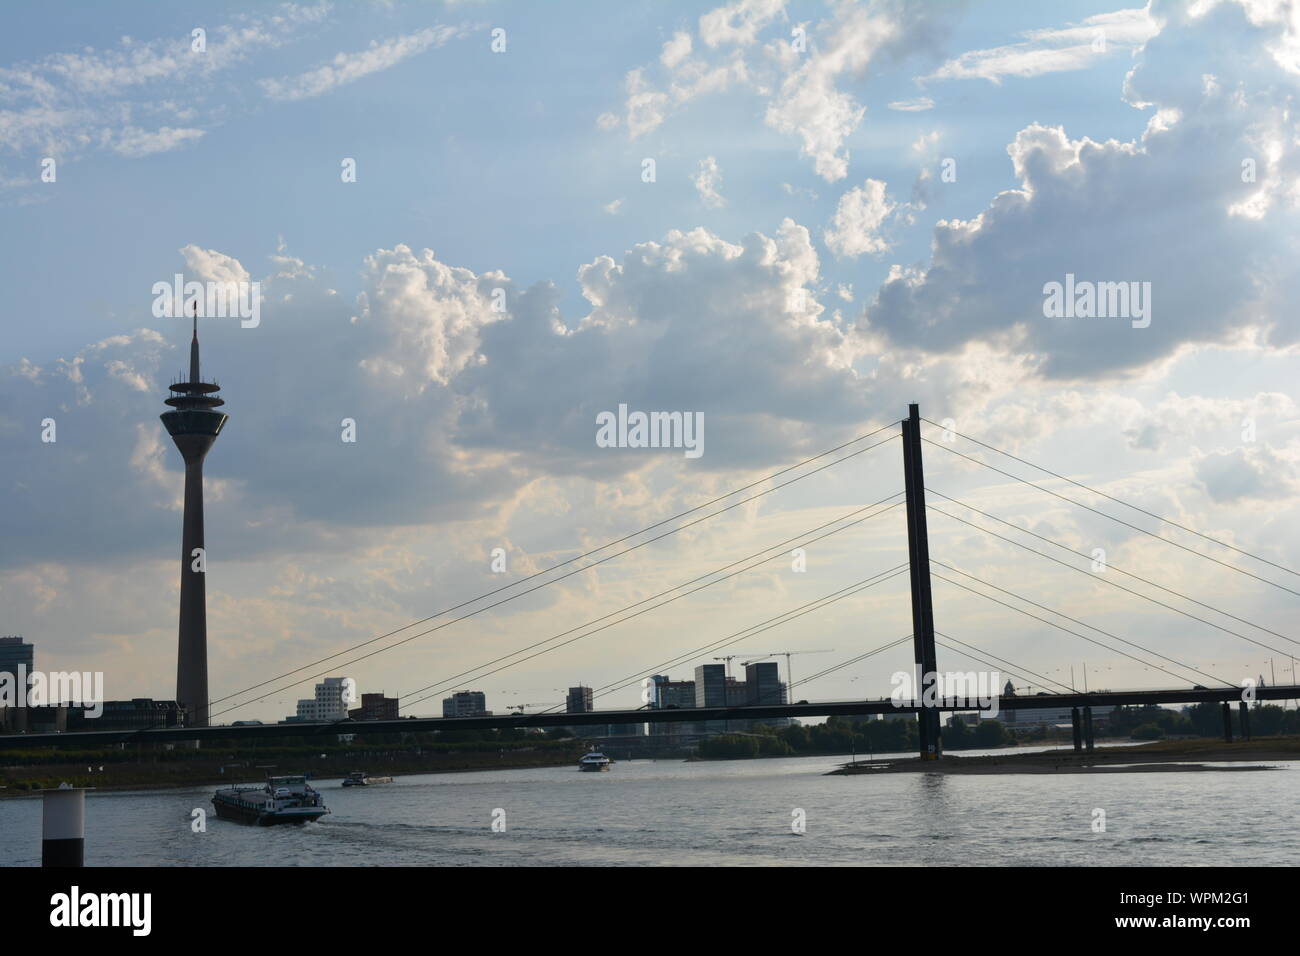 Duesseldorf Bridge High Resolution Stock Photography And Images Alamy